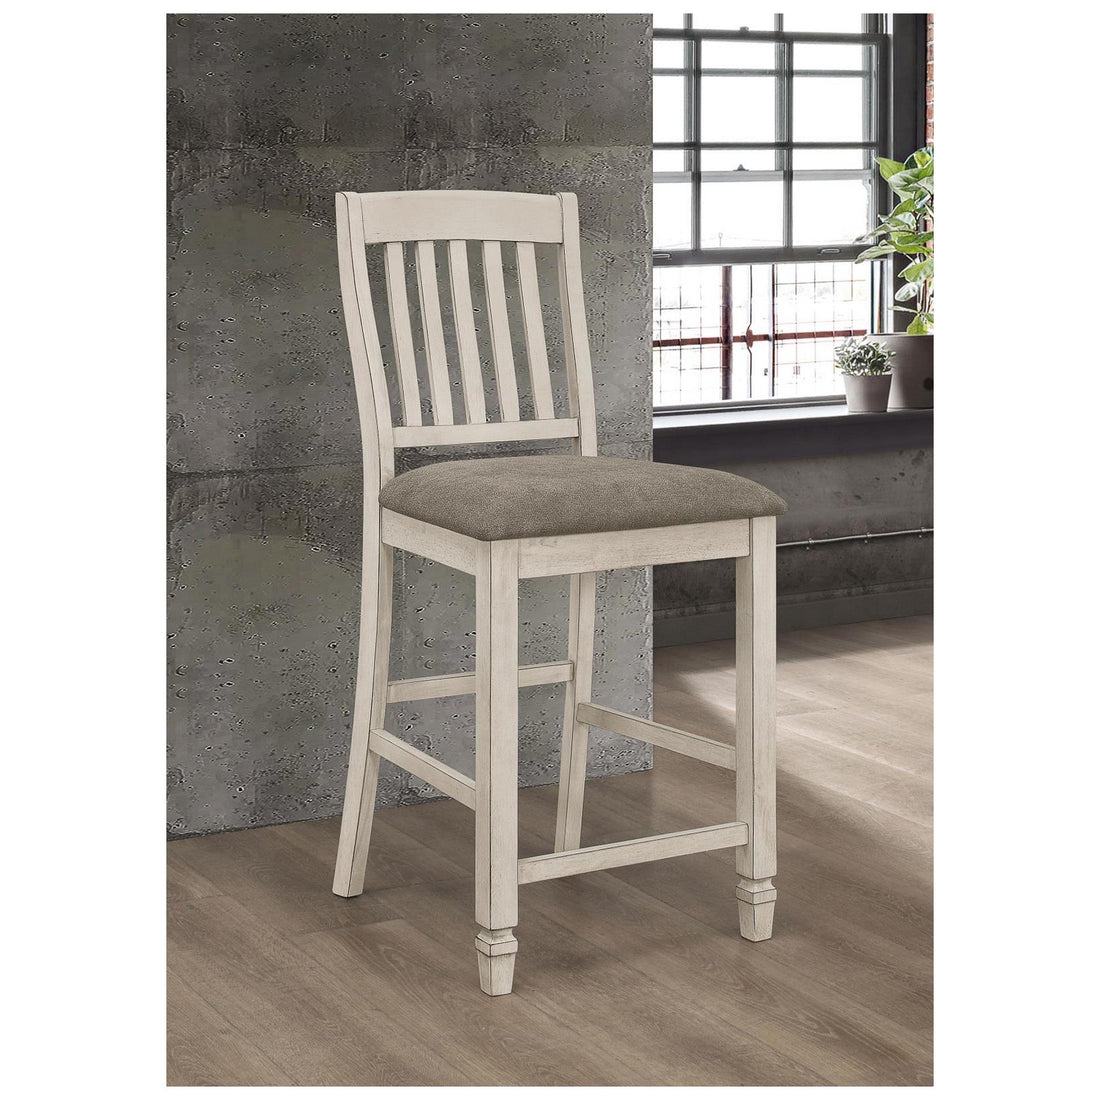 Sarasota Slat Back Counter Height Chairs Grey and Rustic Cream (Set of 2) 192819